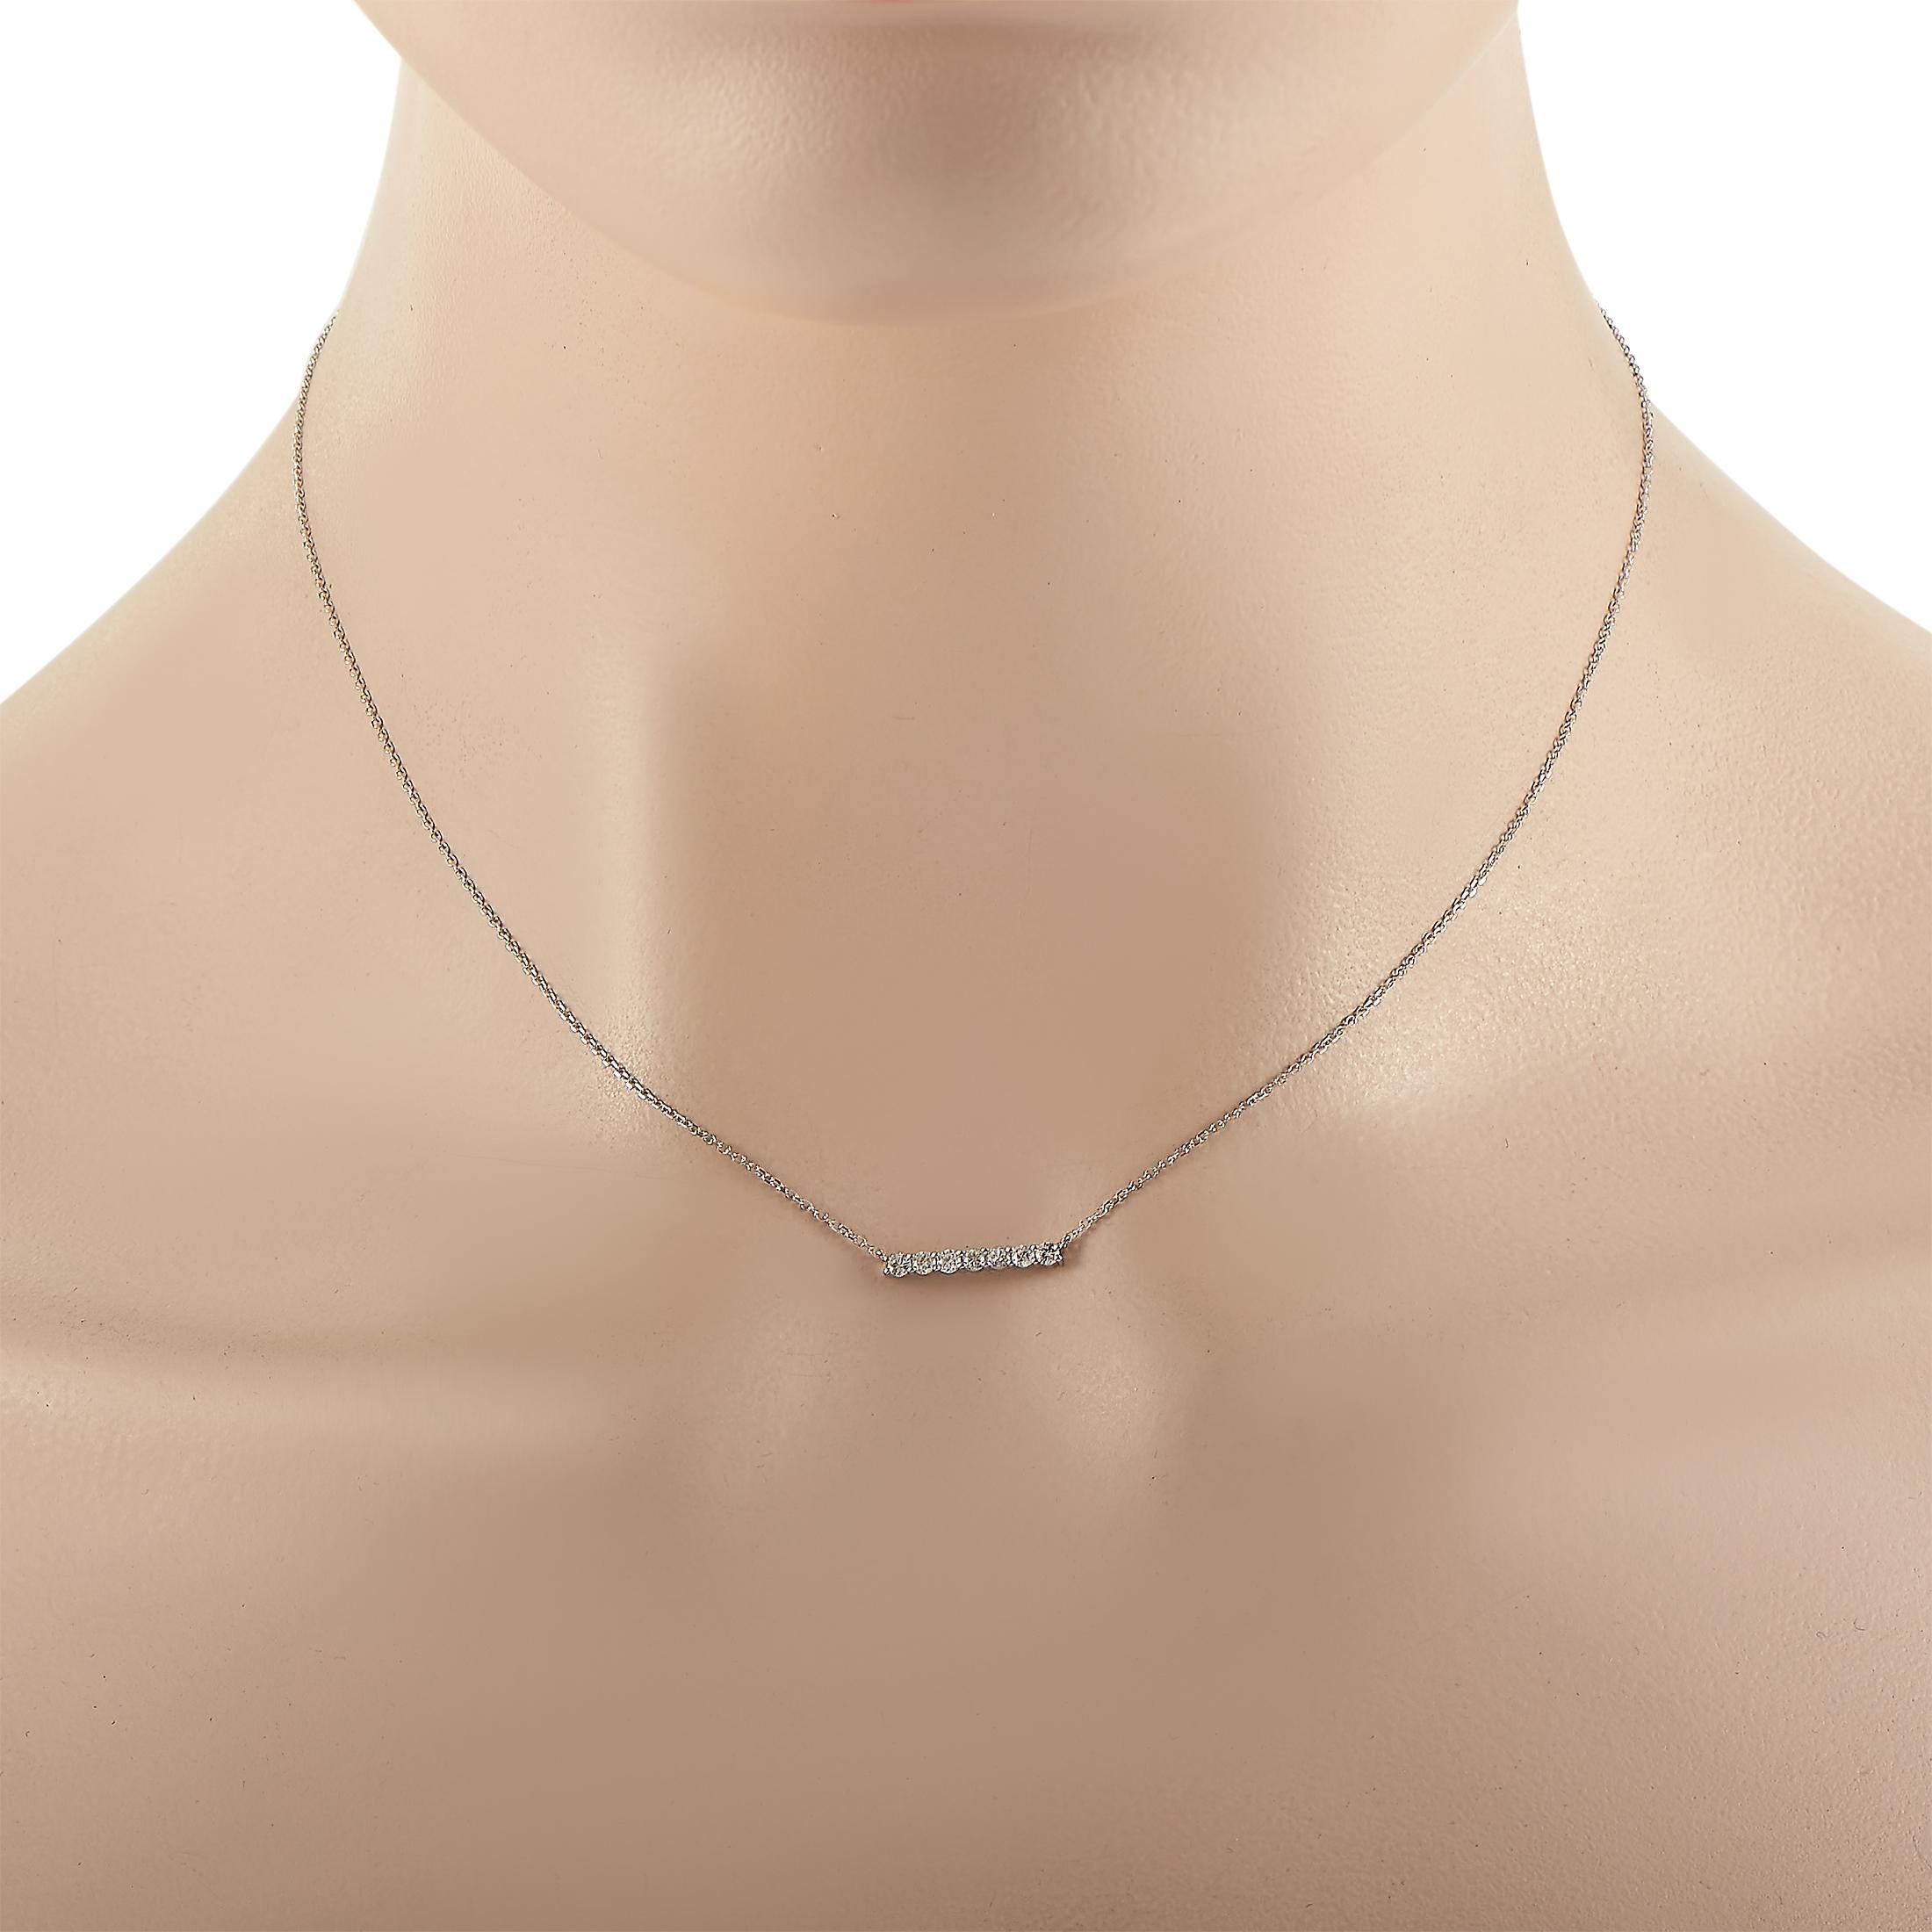 This LB Exclusive necklace is made of 14K white gold and embellished with diamonds that amount to 0.25 carats. The necklace weighs 1.4 grams and boasts a 16” chain and a pendant that measures 0.15” in length and 0.65” in width.
 
 Offered in brand